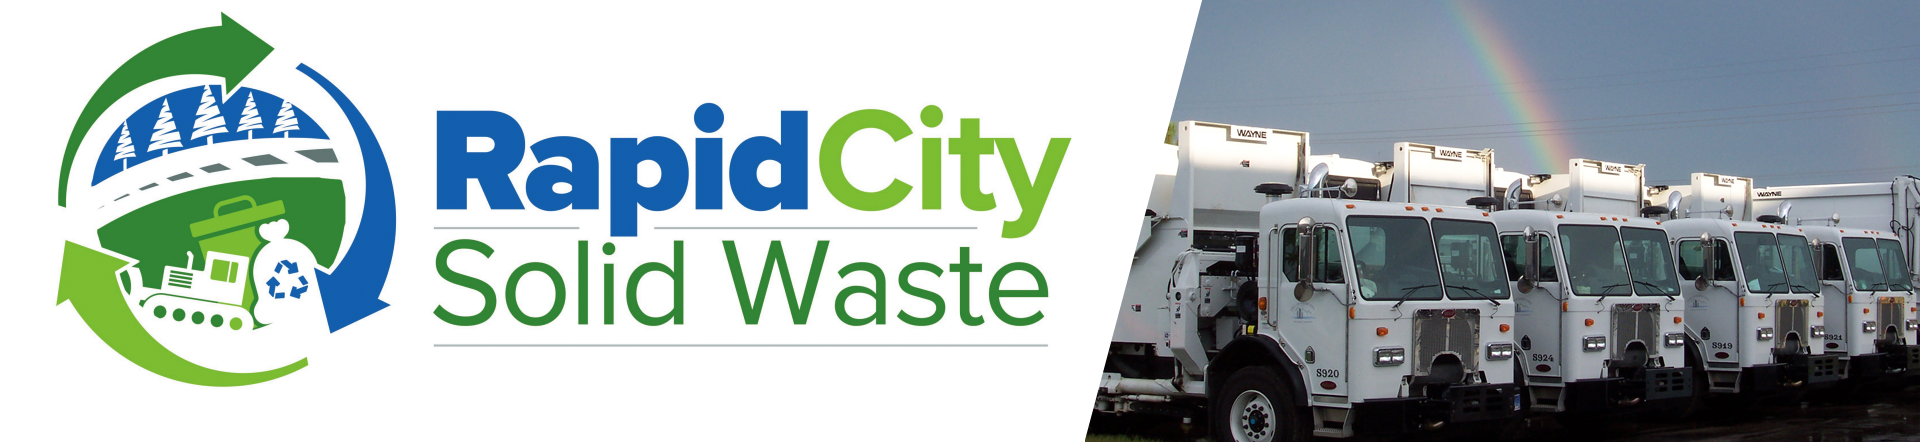 rapid city solid waste